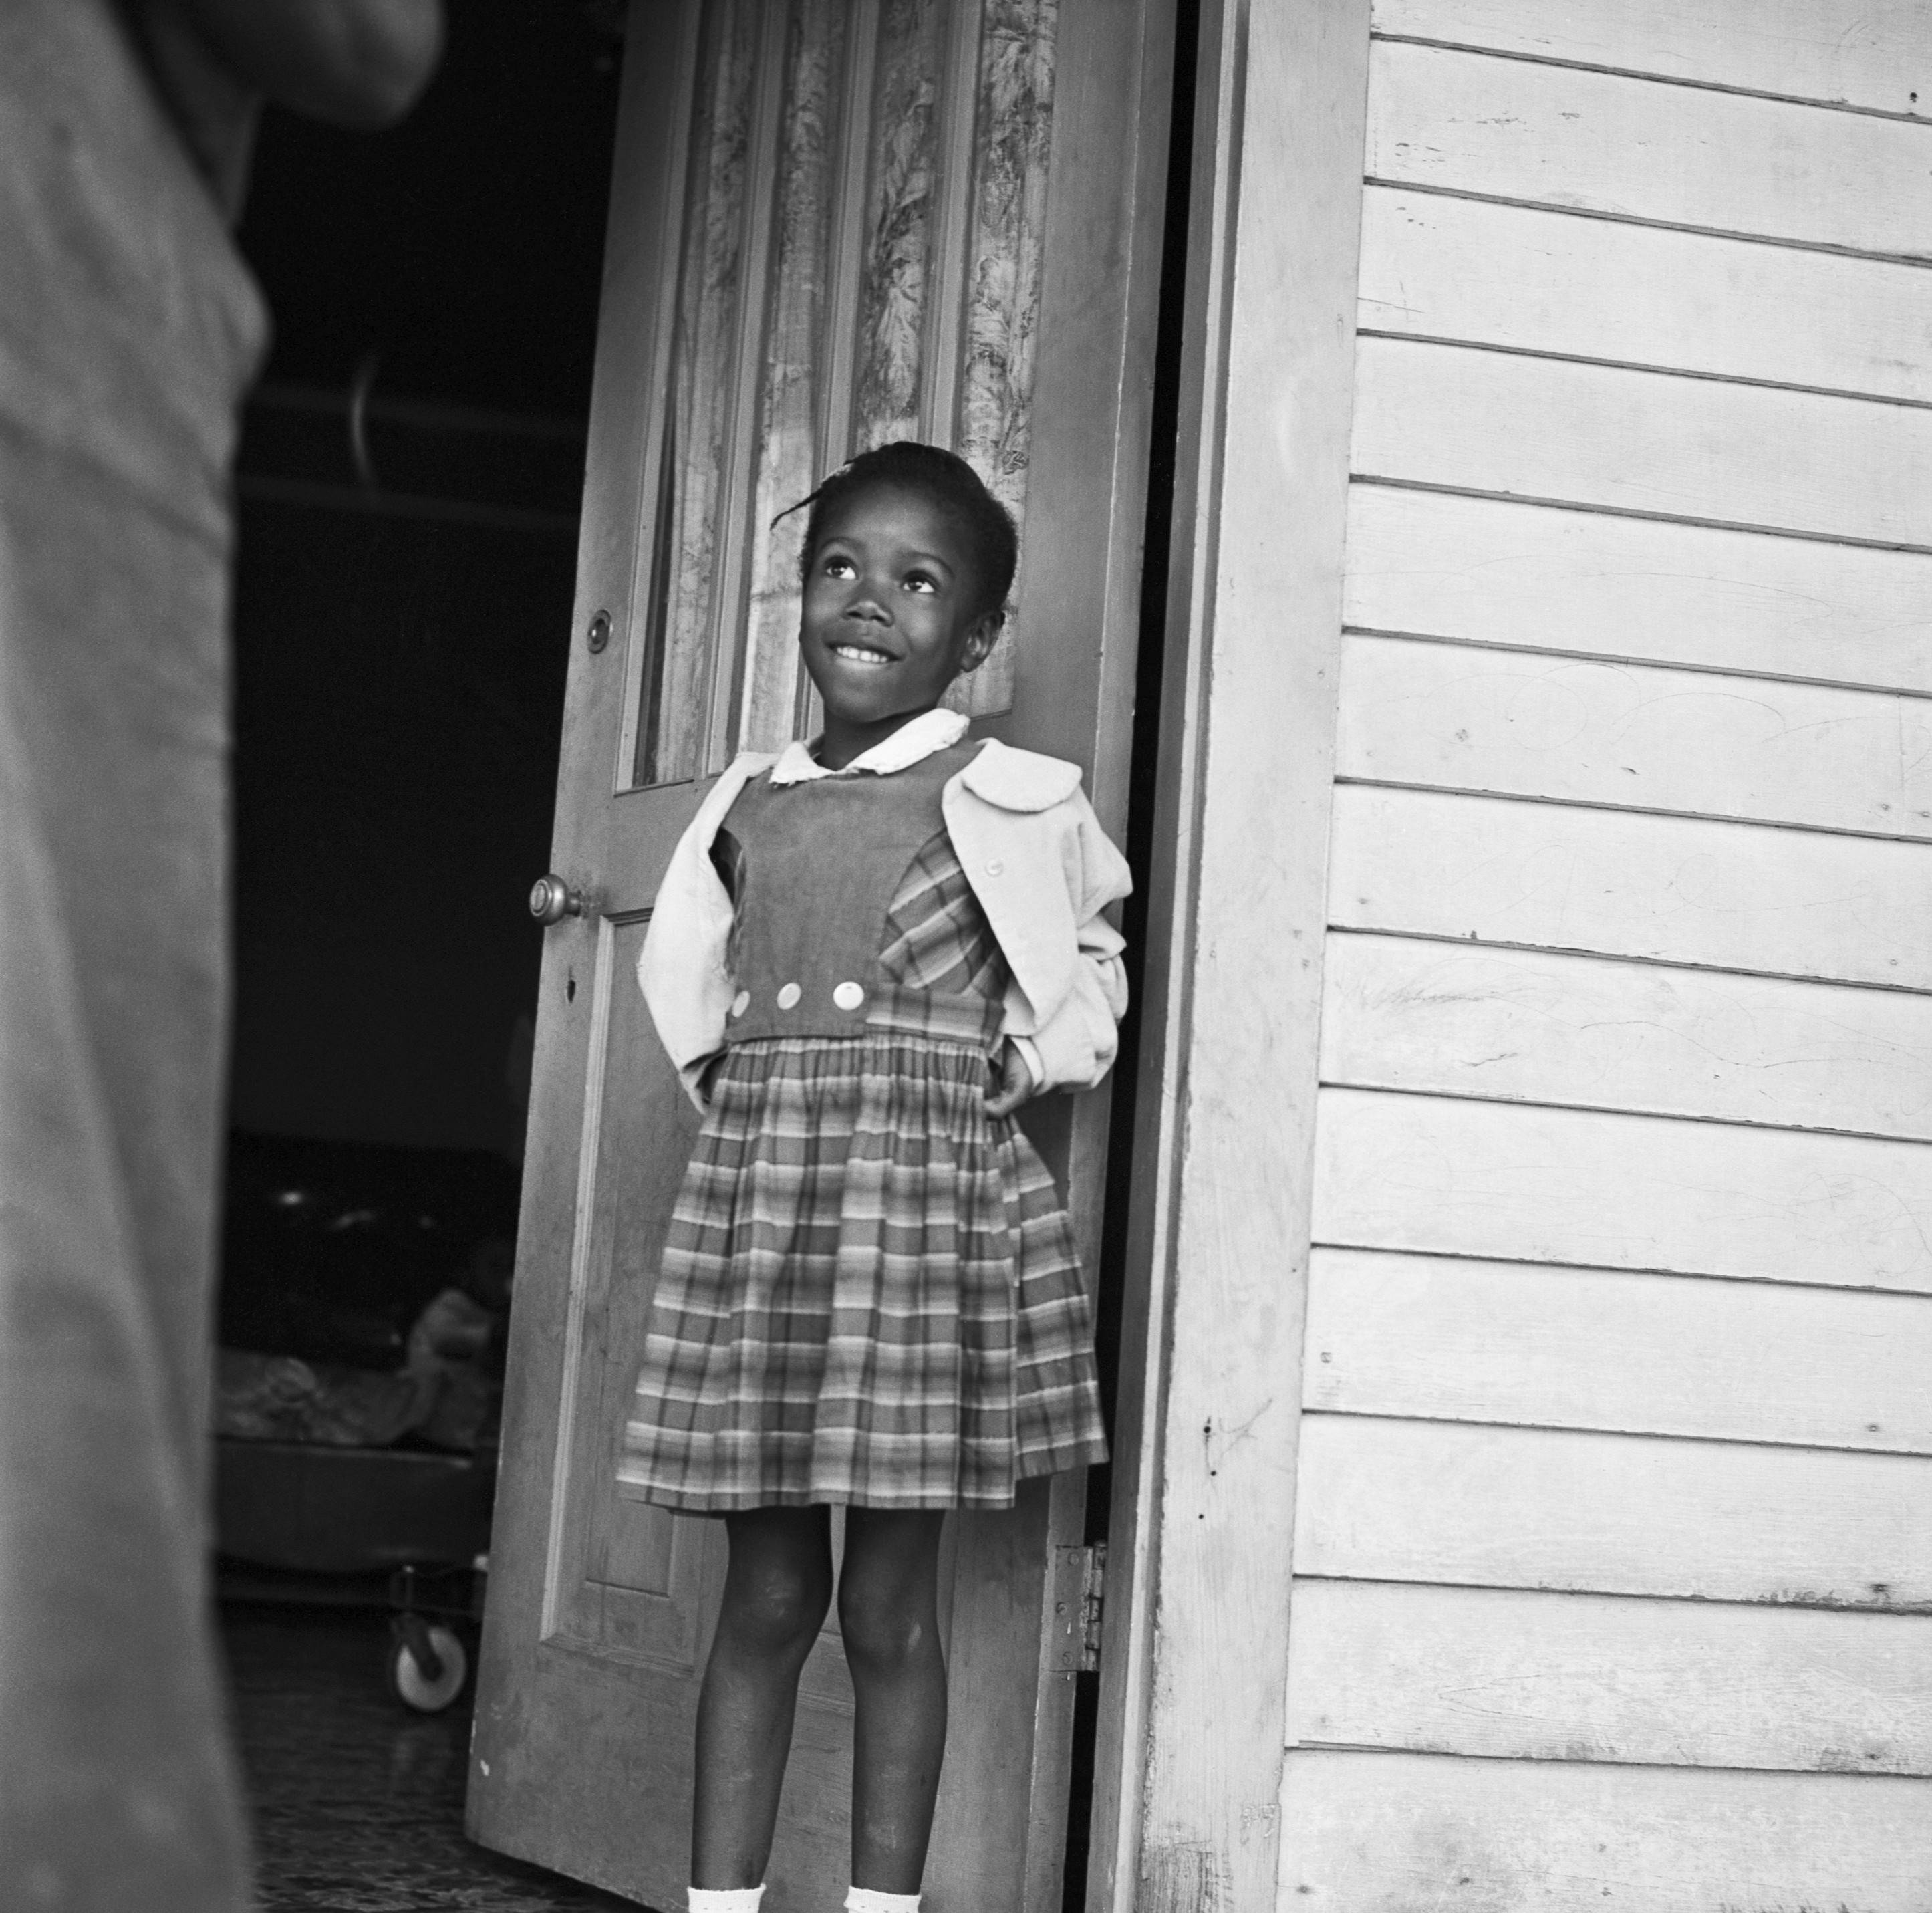 Ruby Bridges, the first black child to attend an all-white elementary 

school, 1960.